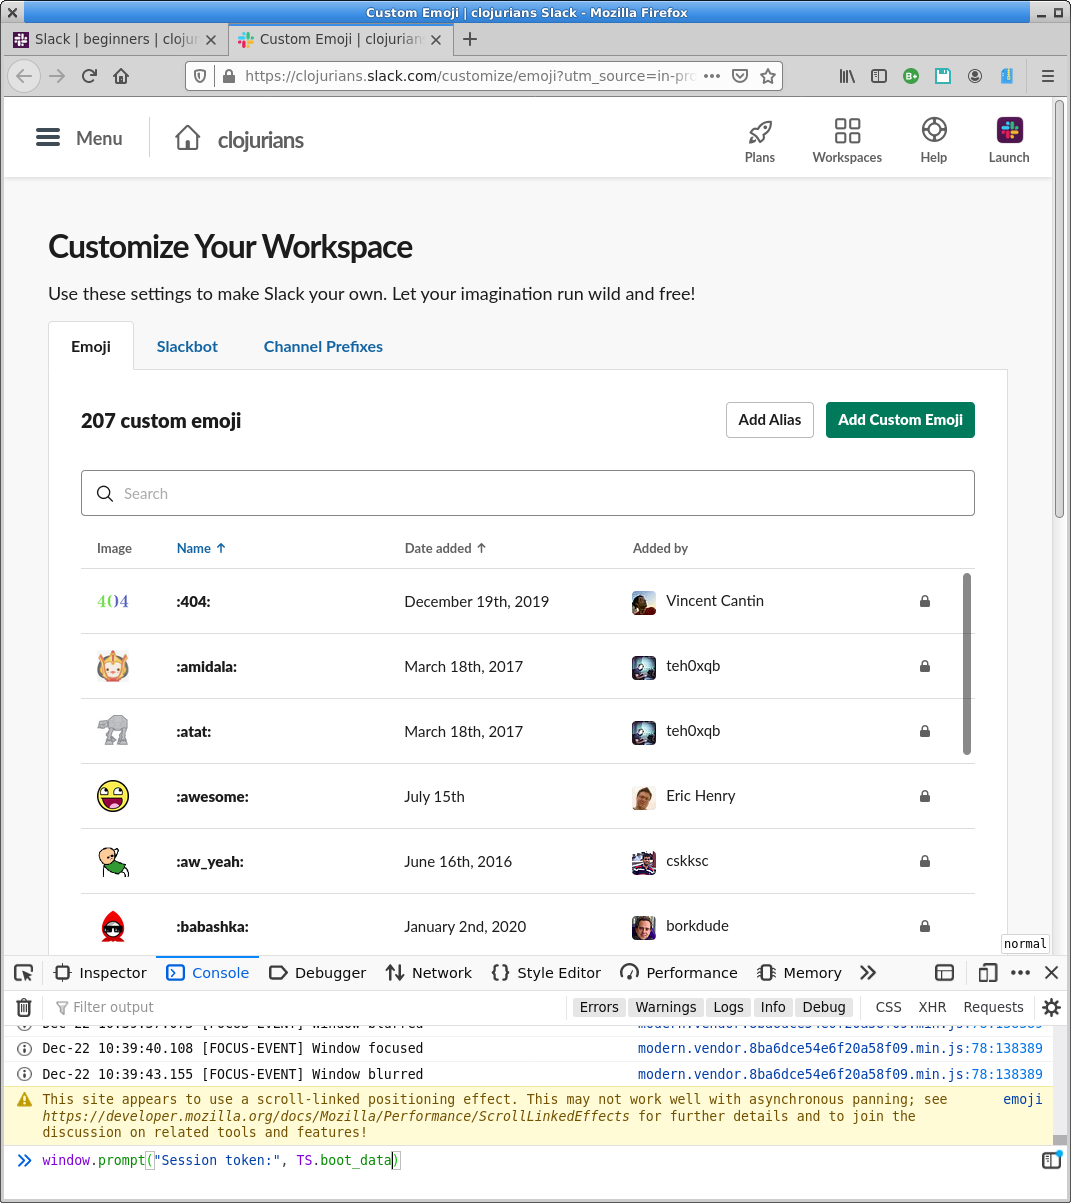 Firefox window with the developer console showing